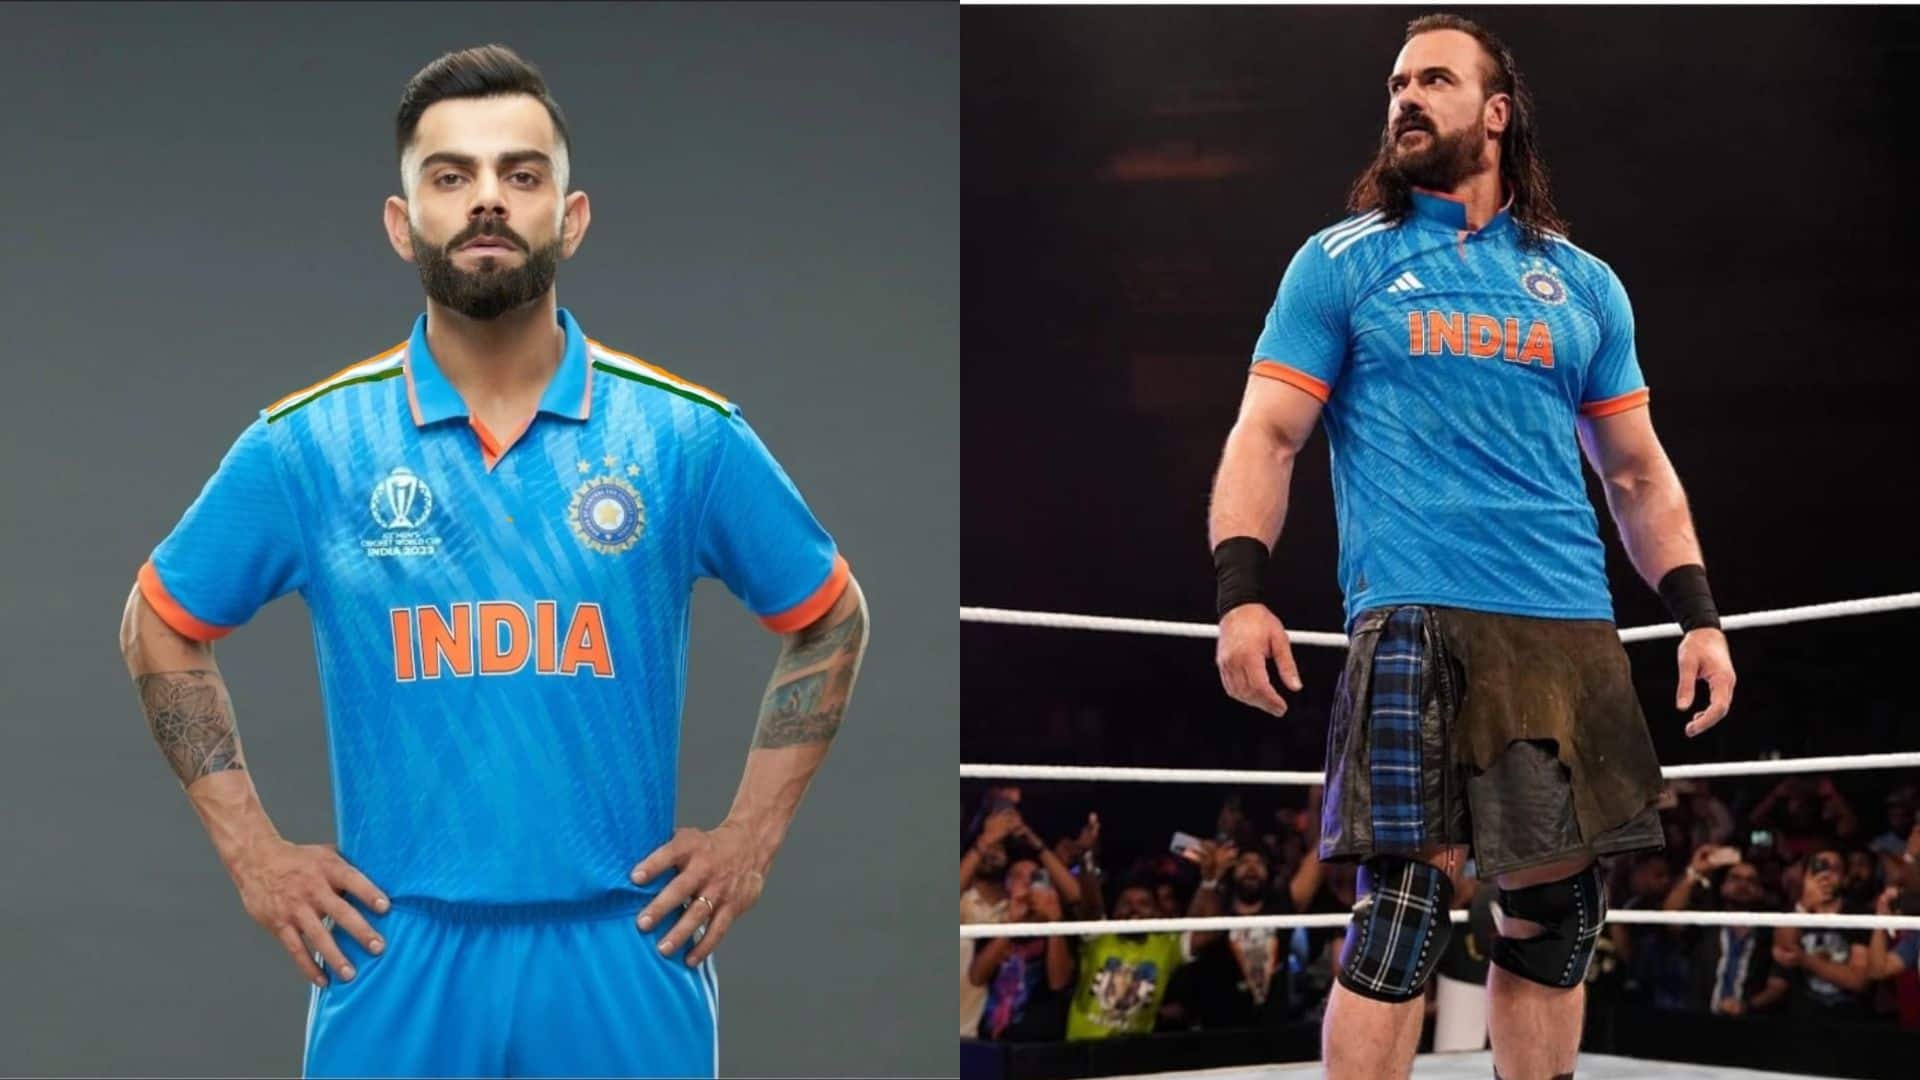 [Watch] WWE's Drew McIntyre Shows Support To India Before 2023 World Cup